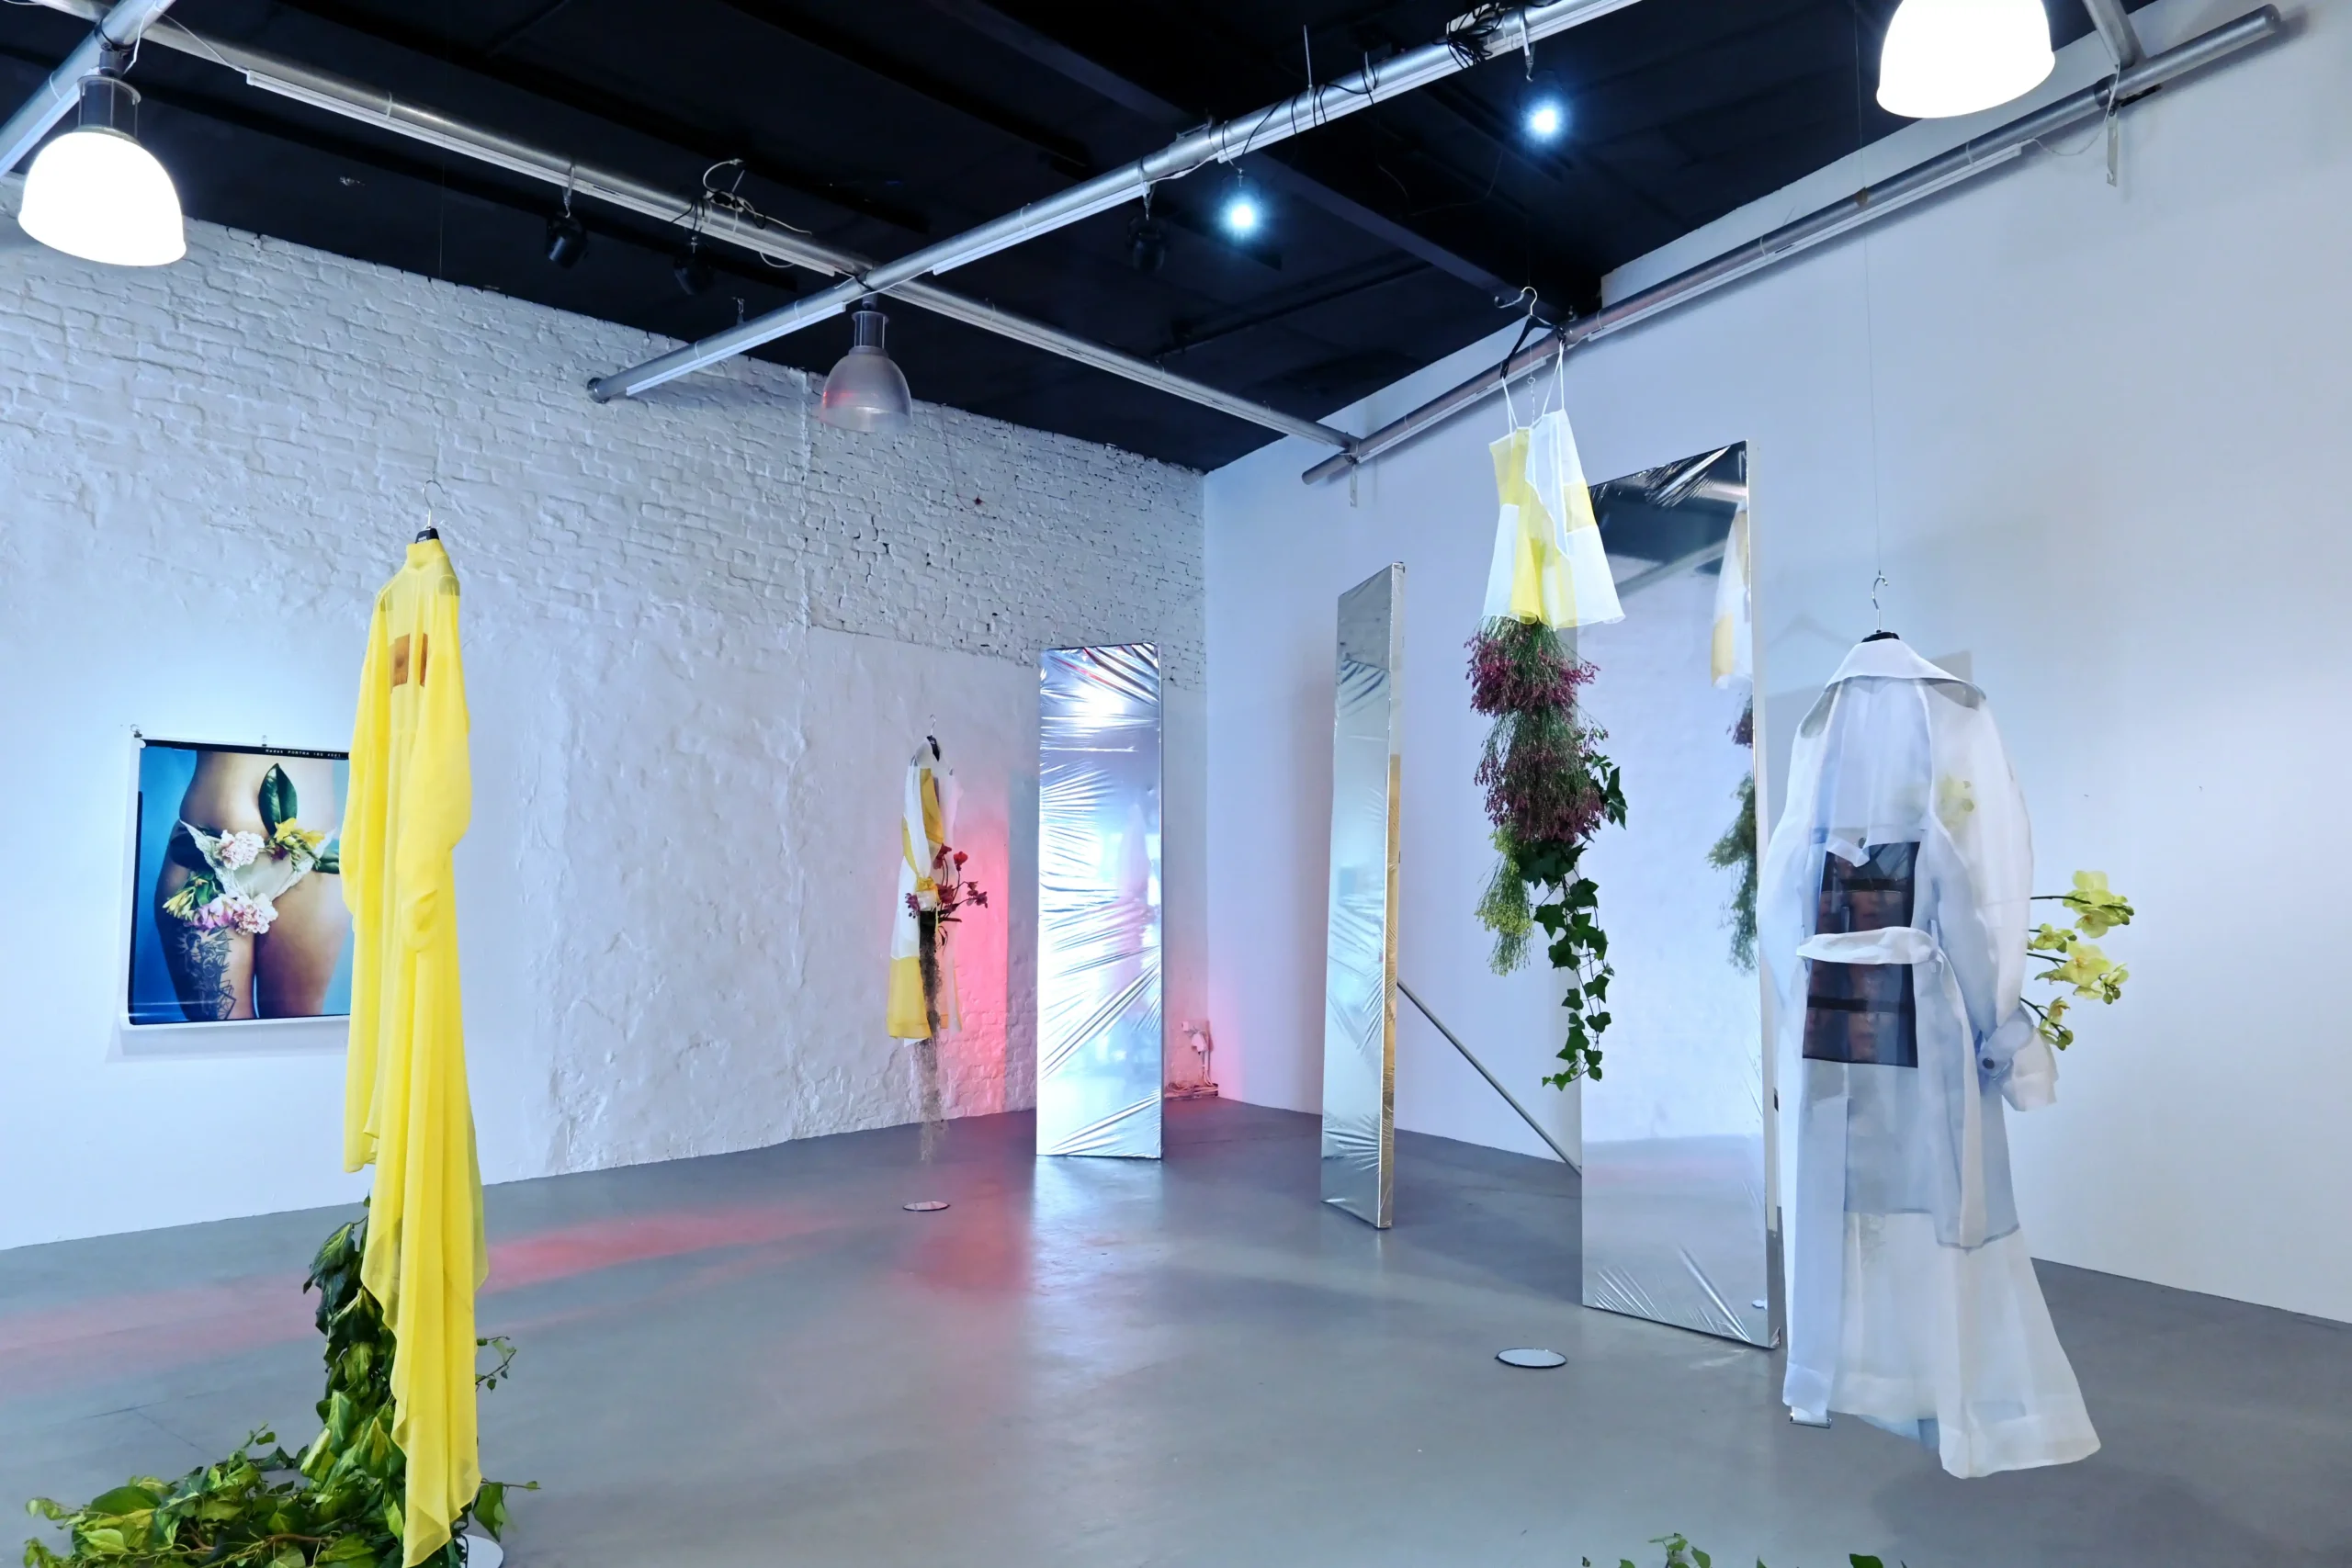 Strike a Pose award installation, view with Karen Paulina Biswell and Societe Angelique sustainable fashion